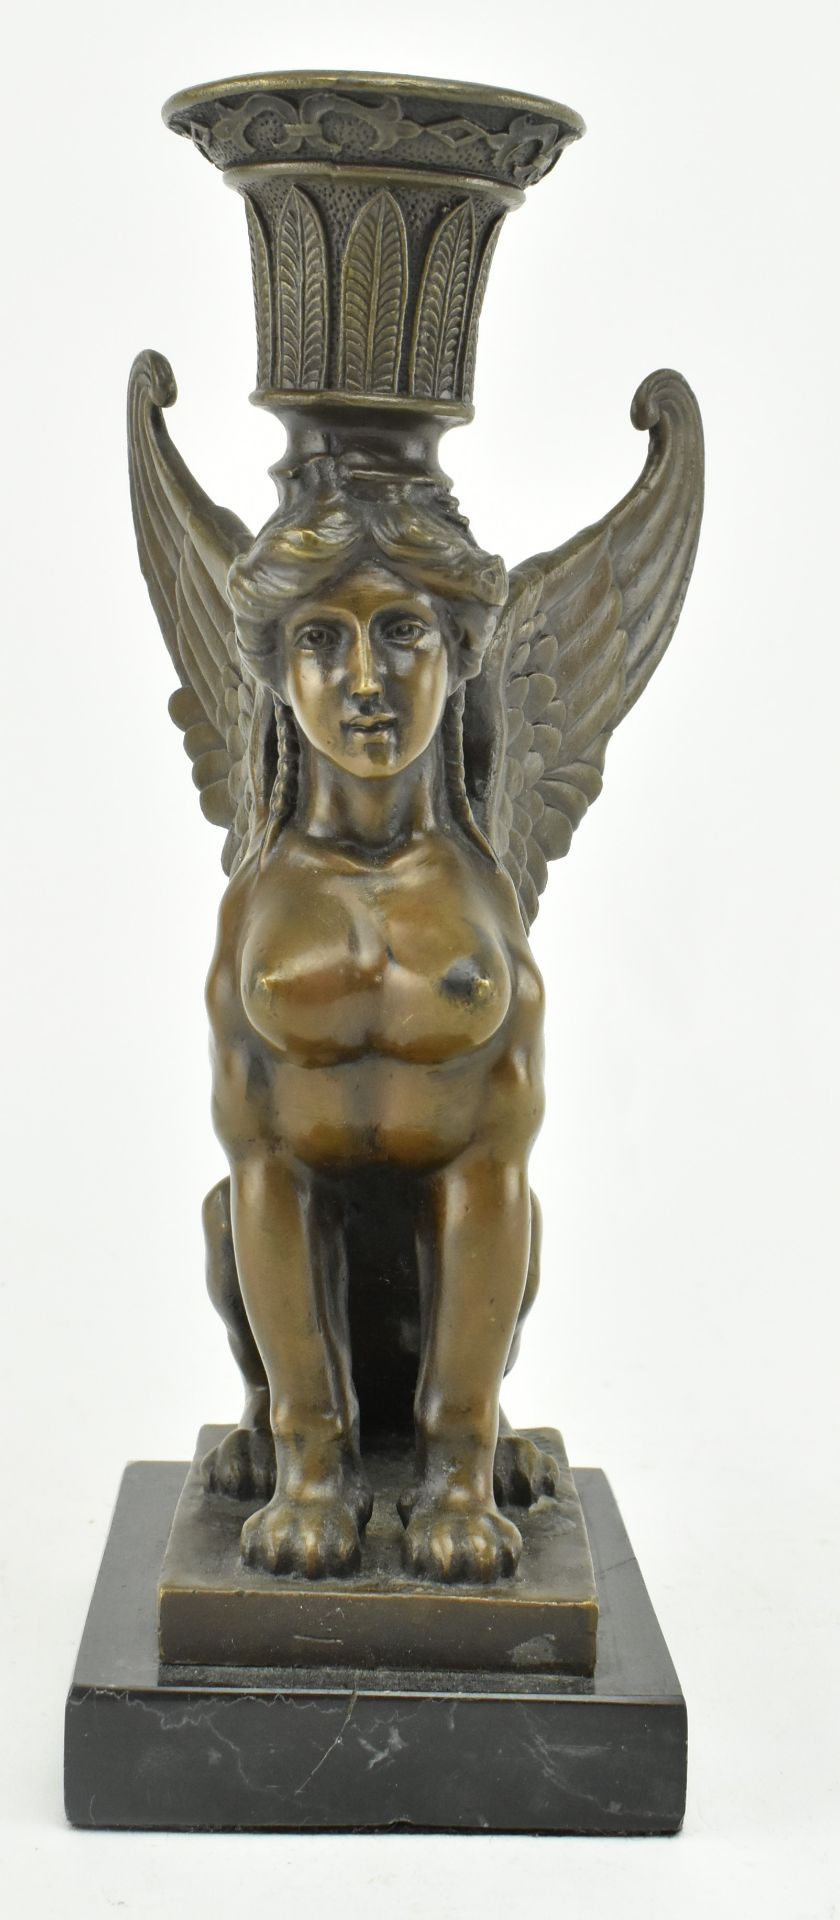 SIGNED ART DECO BRONZE & MARBLE NUDE SPHINX CANDLE HOLDER - Image 2 of 6